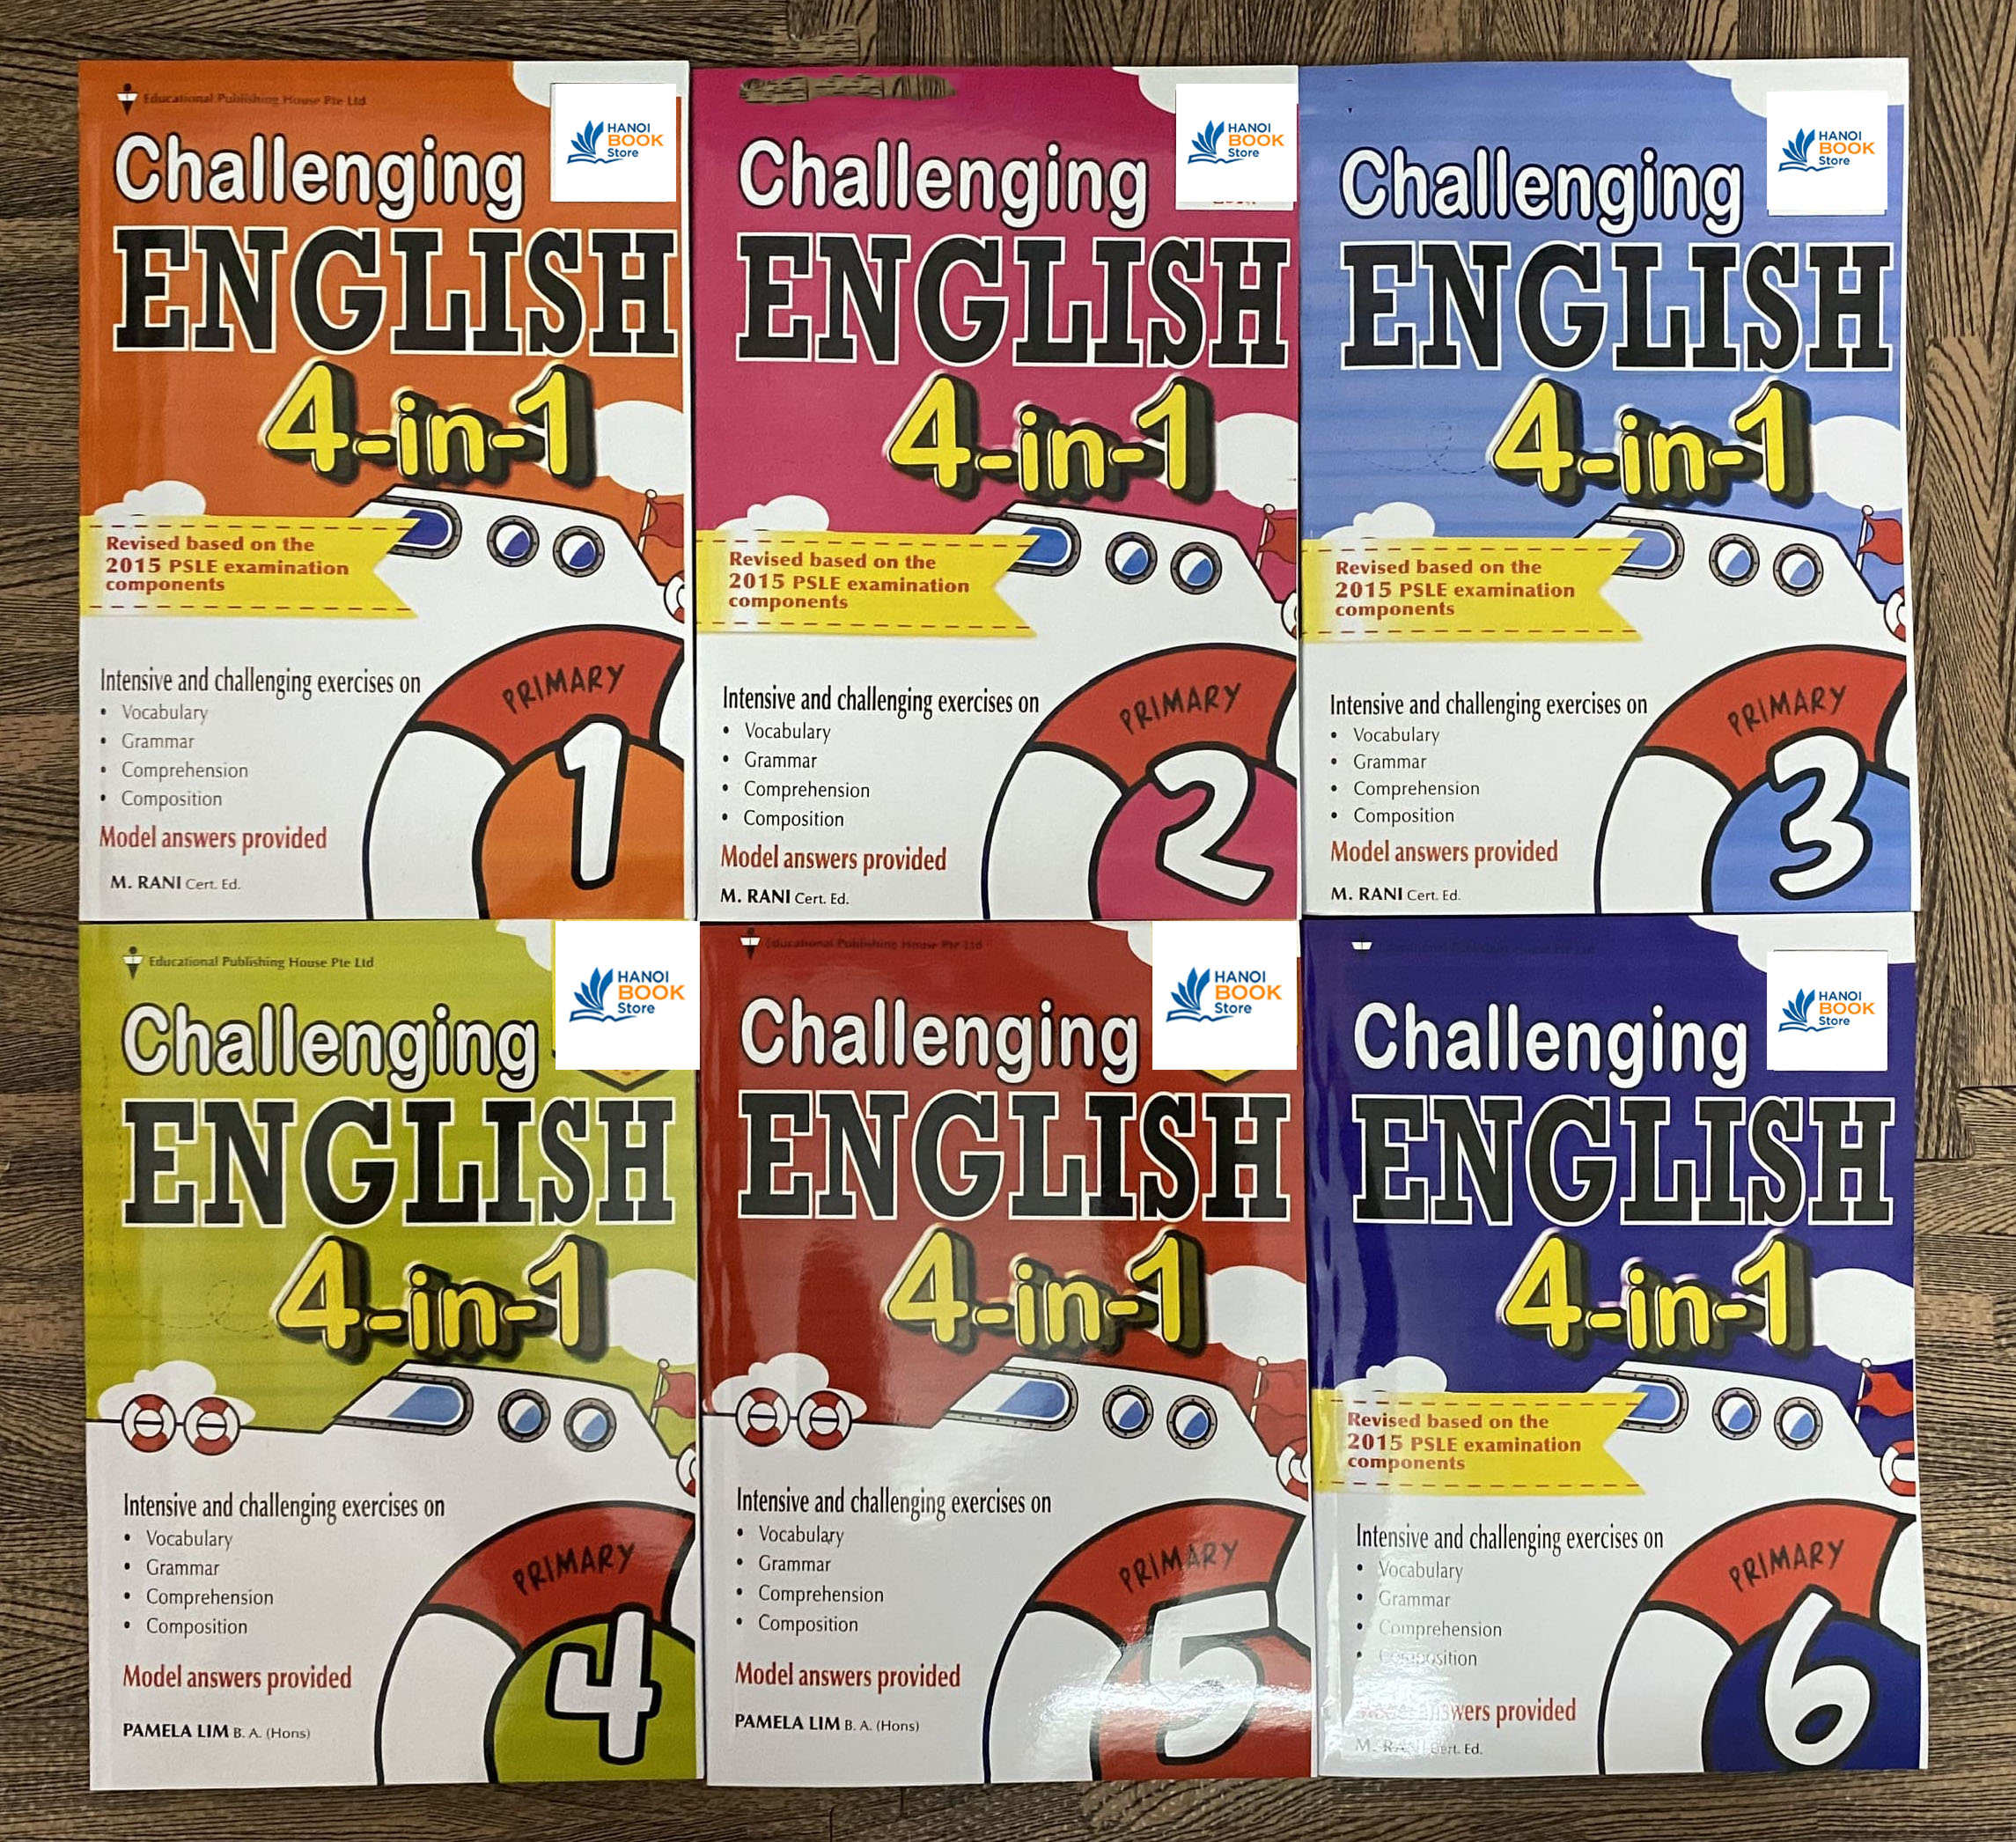 Challenging in English 4-in-1 bộ 6 cuốn - Hanoi bookstore